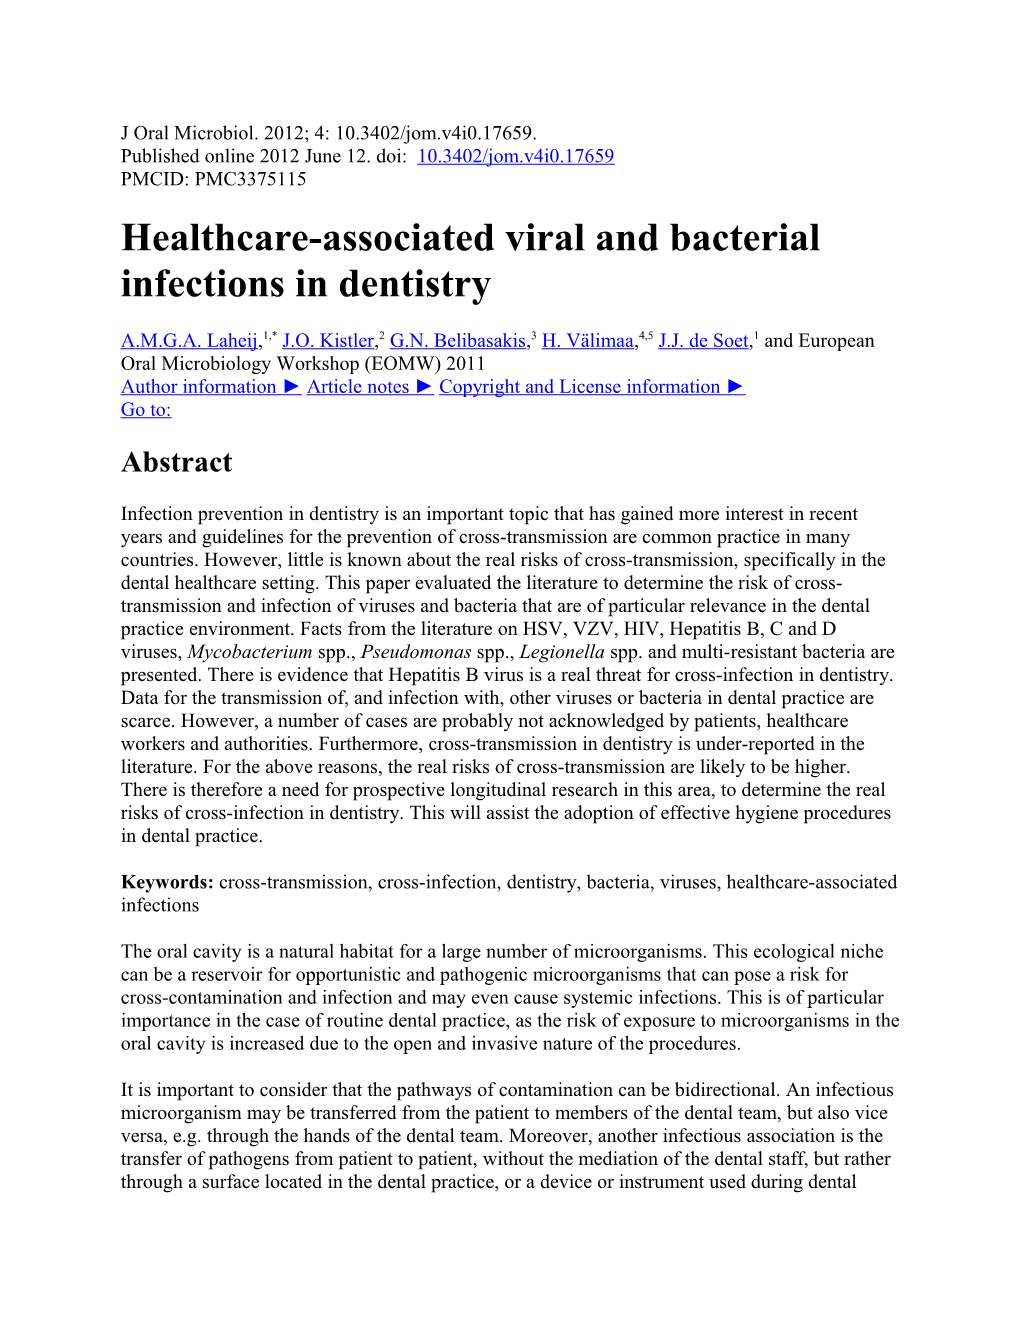 Healthcare-Associated Viral and Bacterial Infections in Dentistry